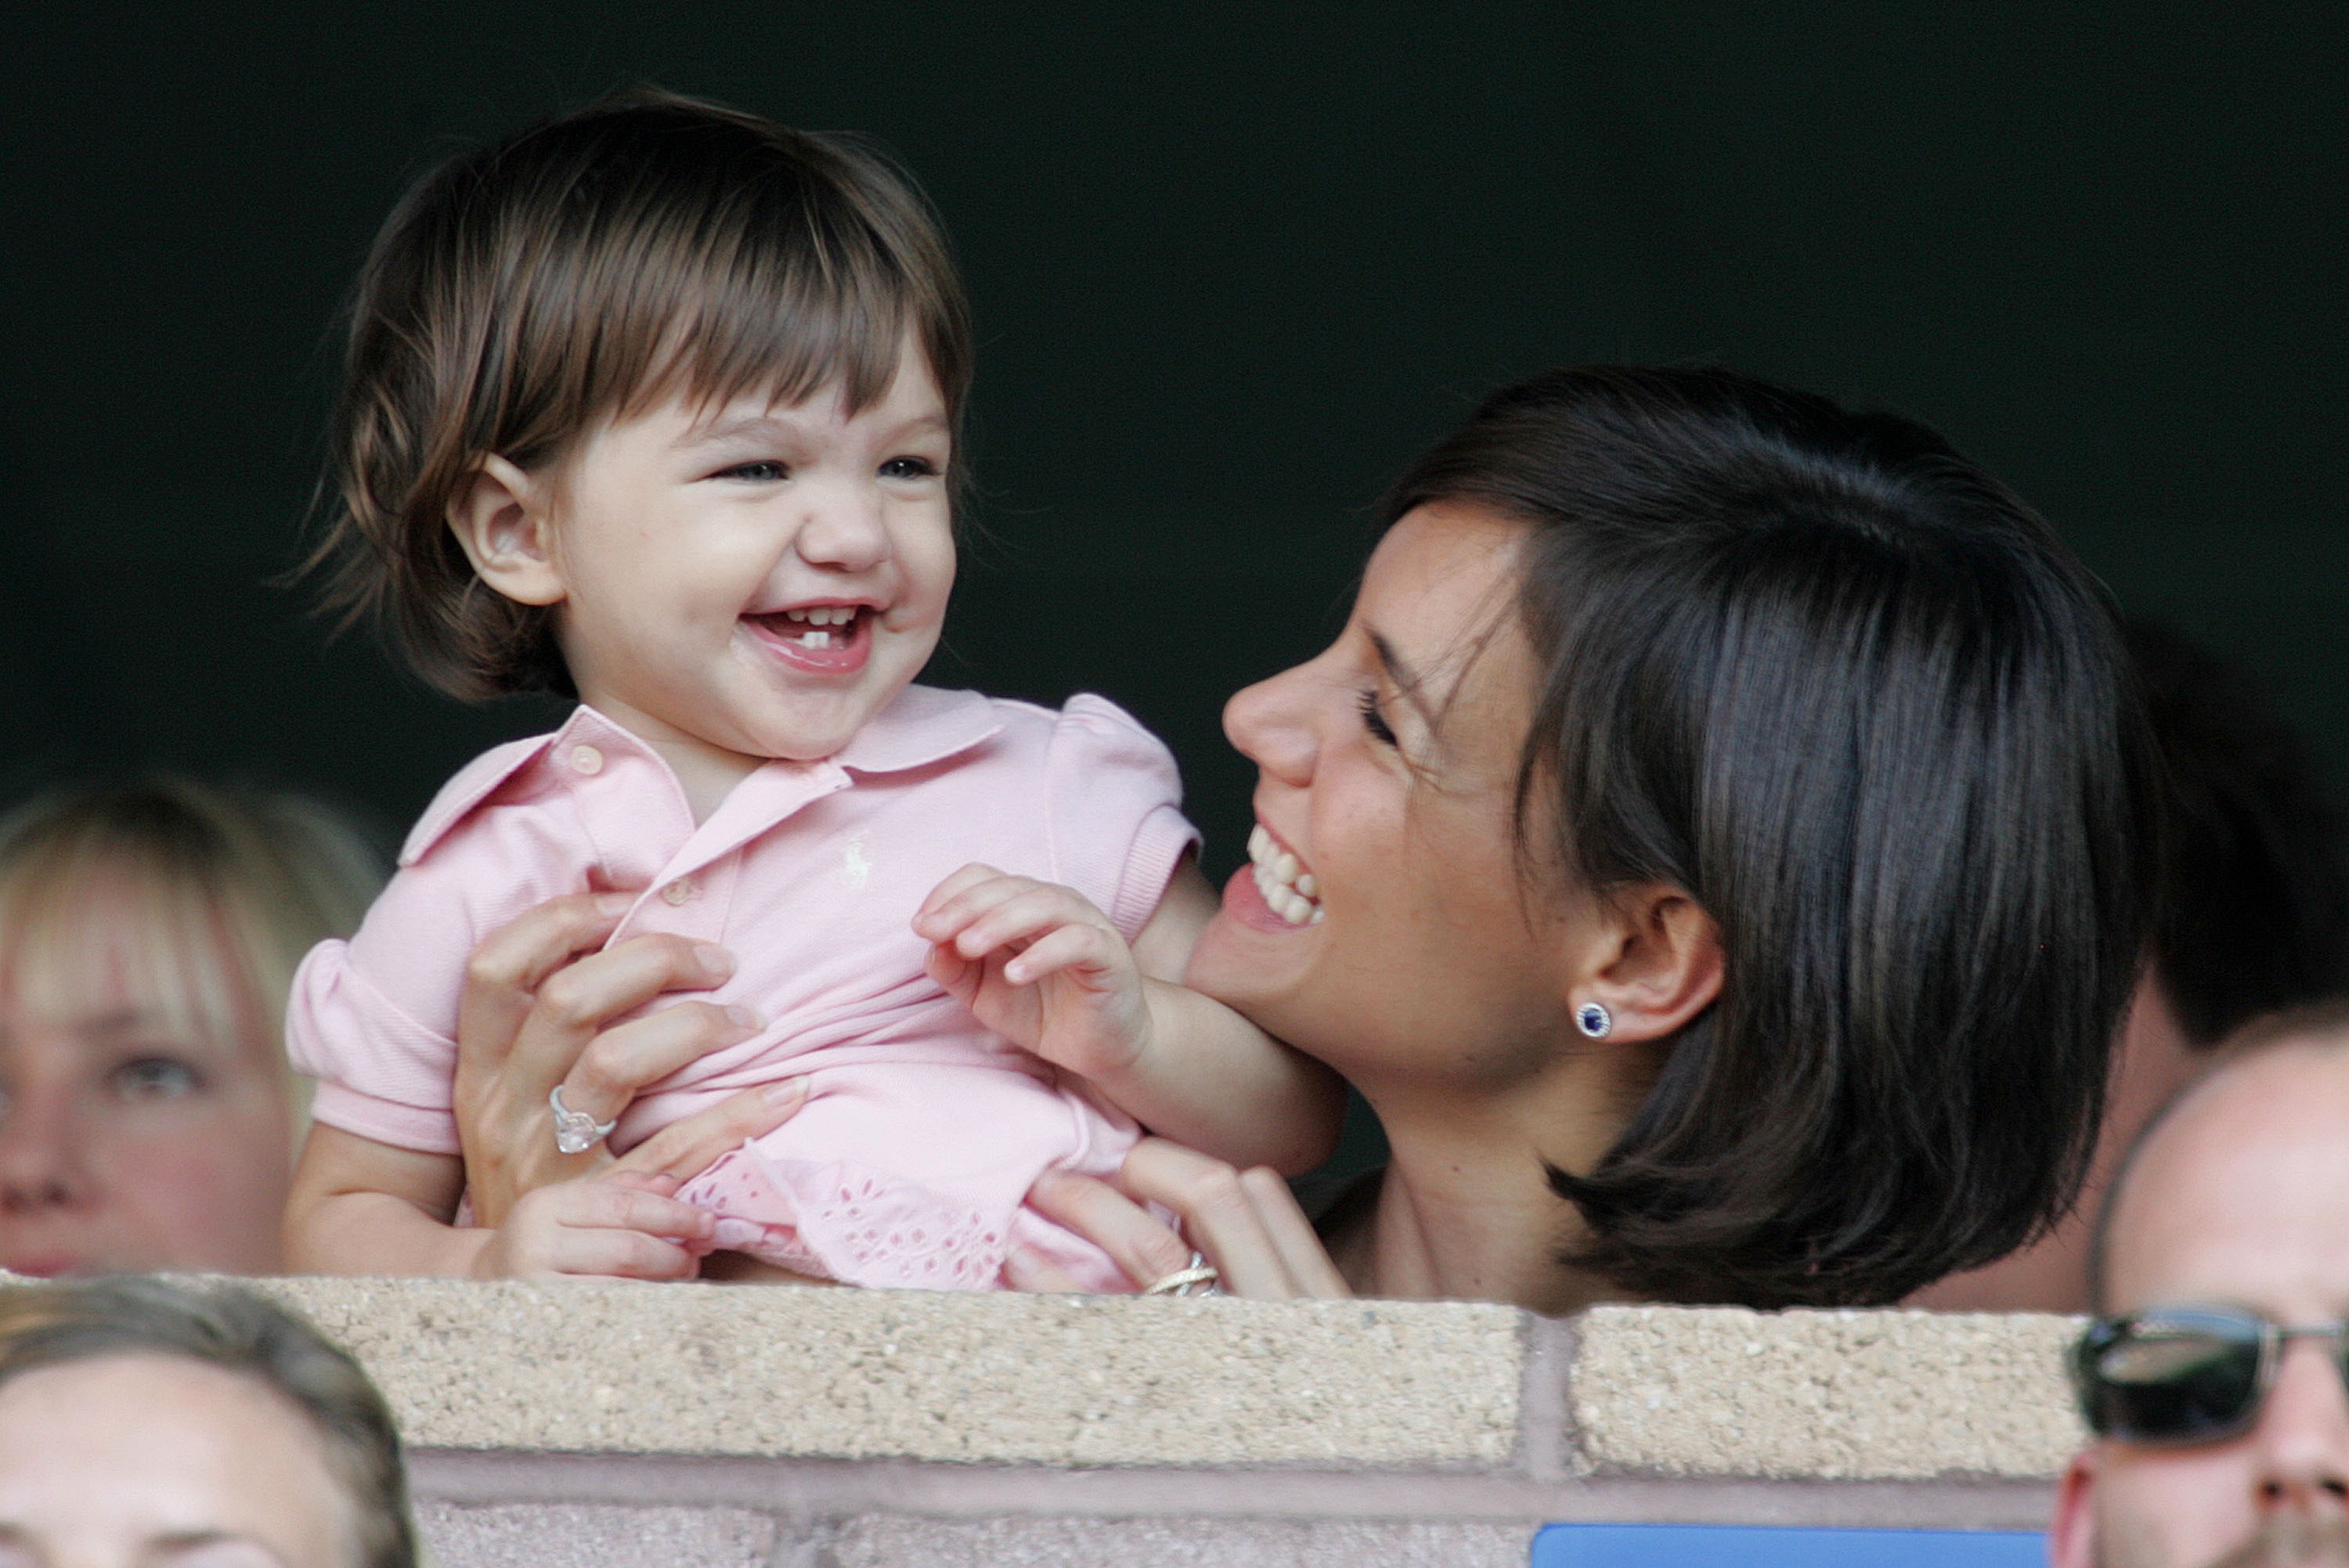 Katie Holmes and Suri Cruise on July 22, 2007 in Carson, California | Source: Getty Images